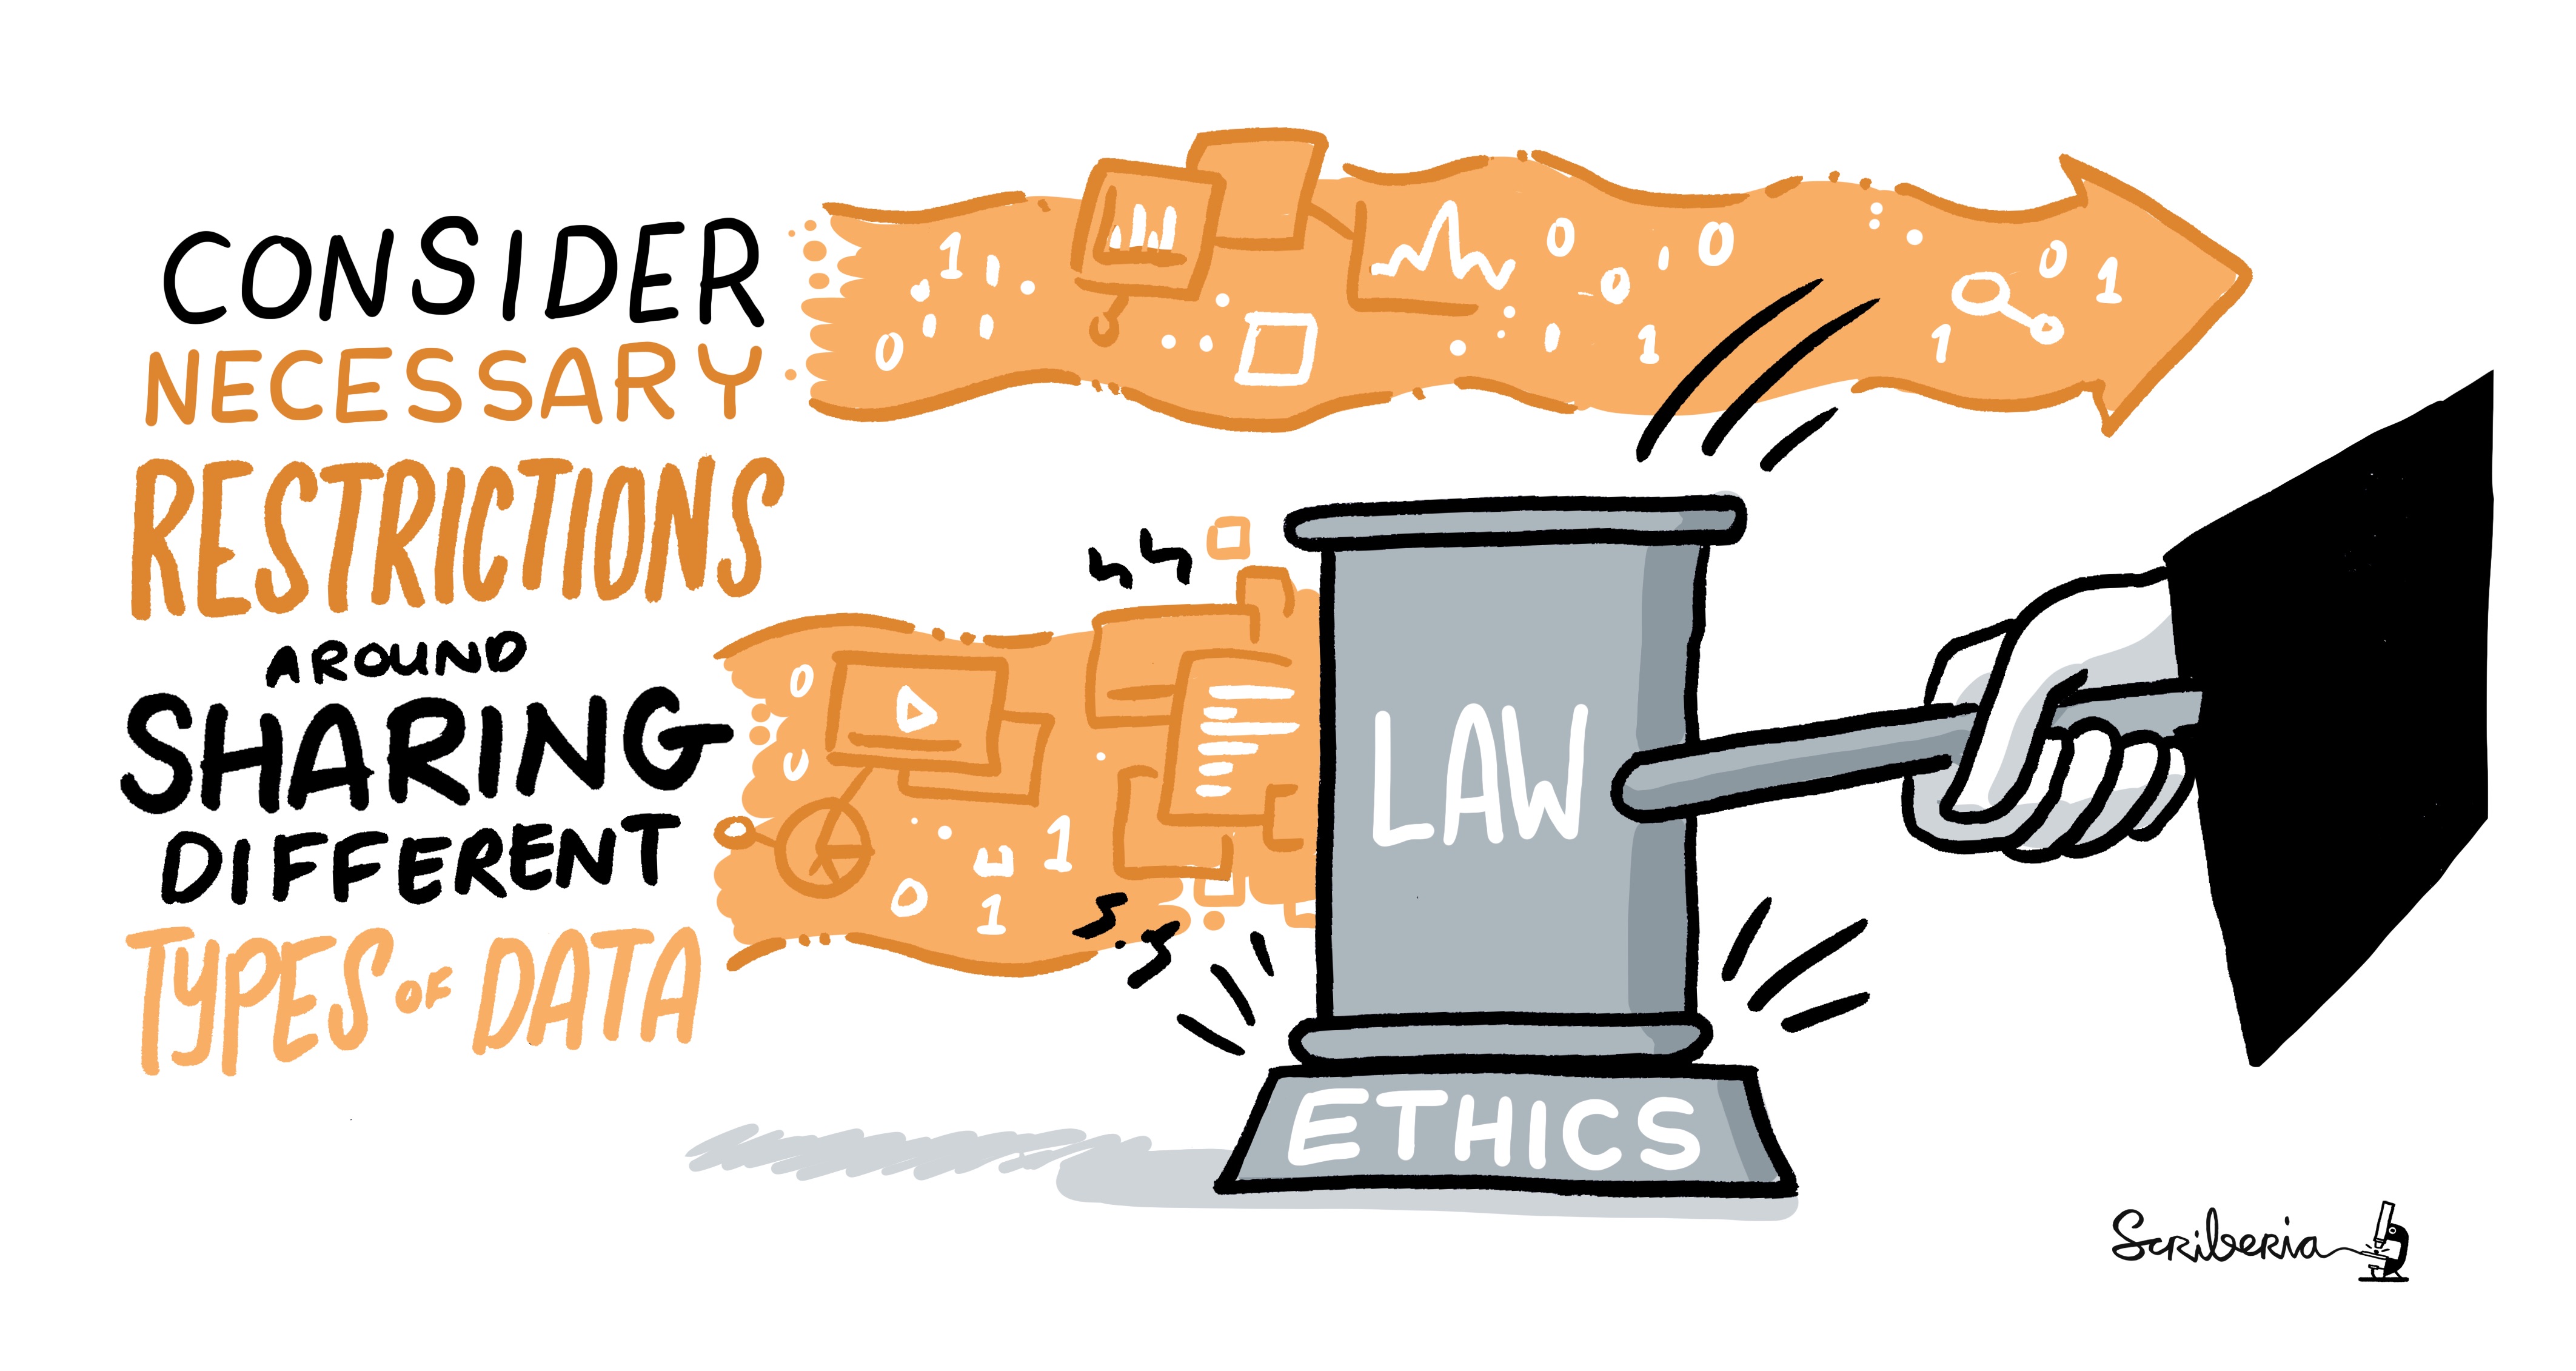 An illustration of a wooden judge hammer labeled with law is hitting a plank labeled with ethics with a quotation "consider necessary restriction around sharing different types of data"